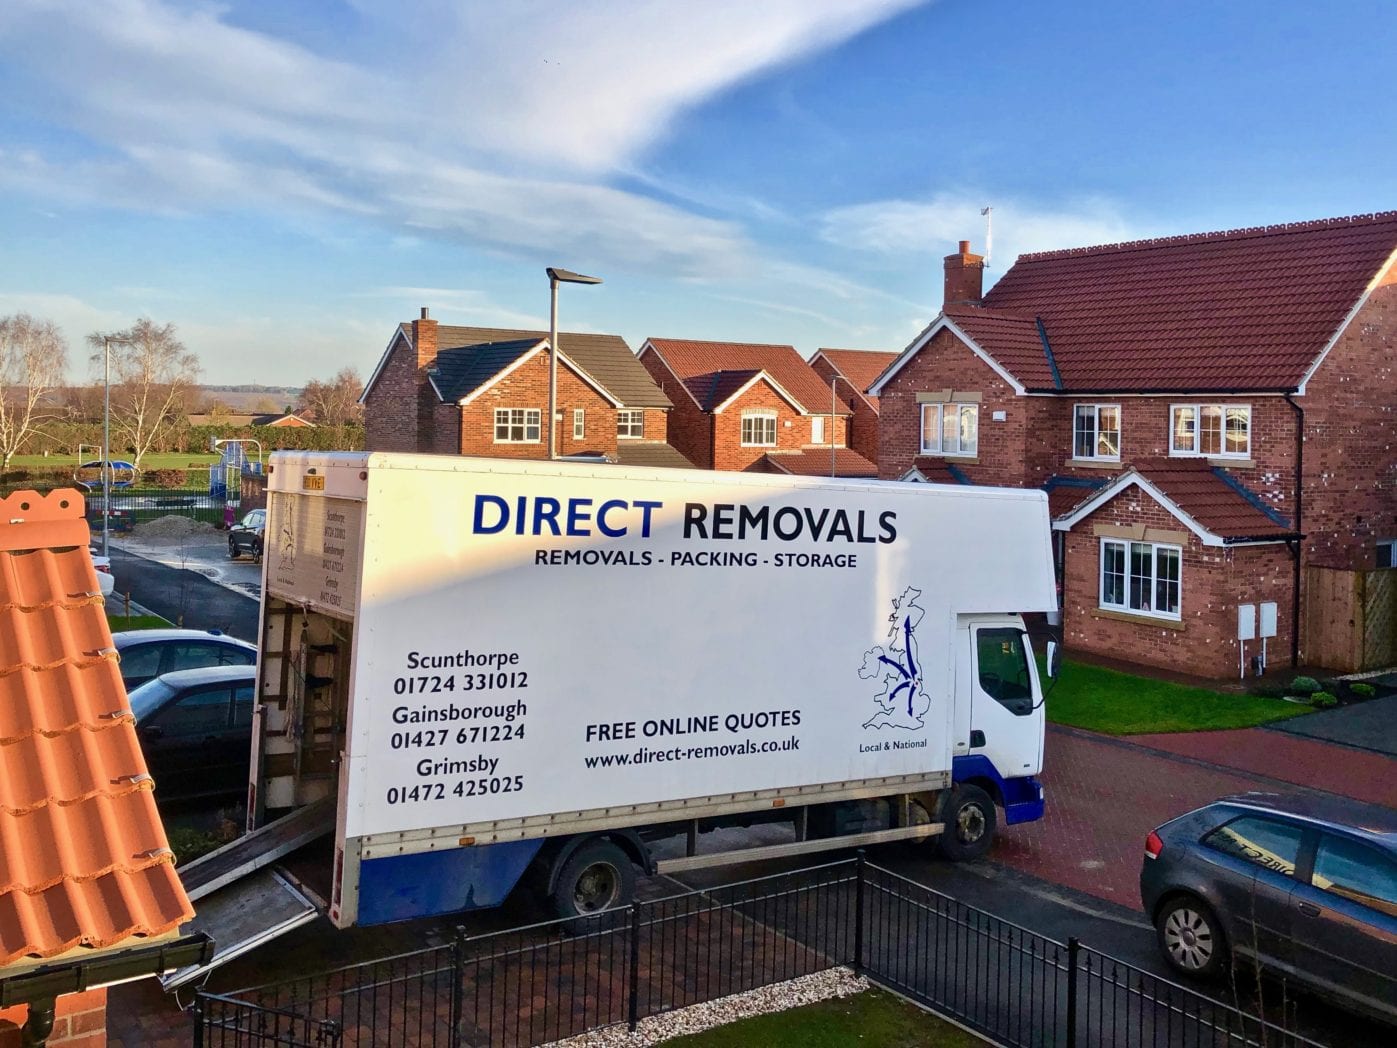 Direct removals unloading furniture at a house